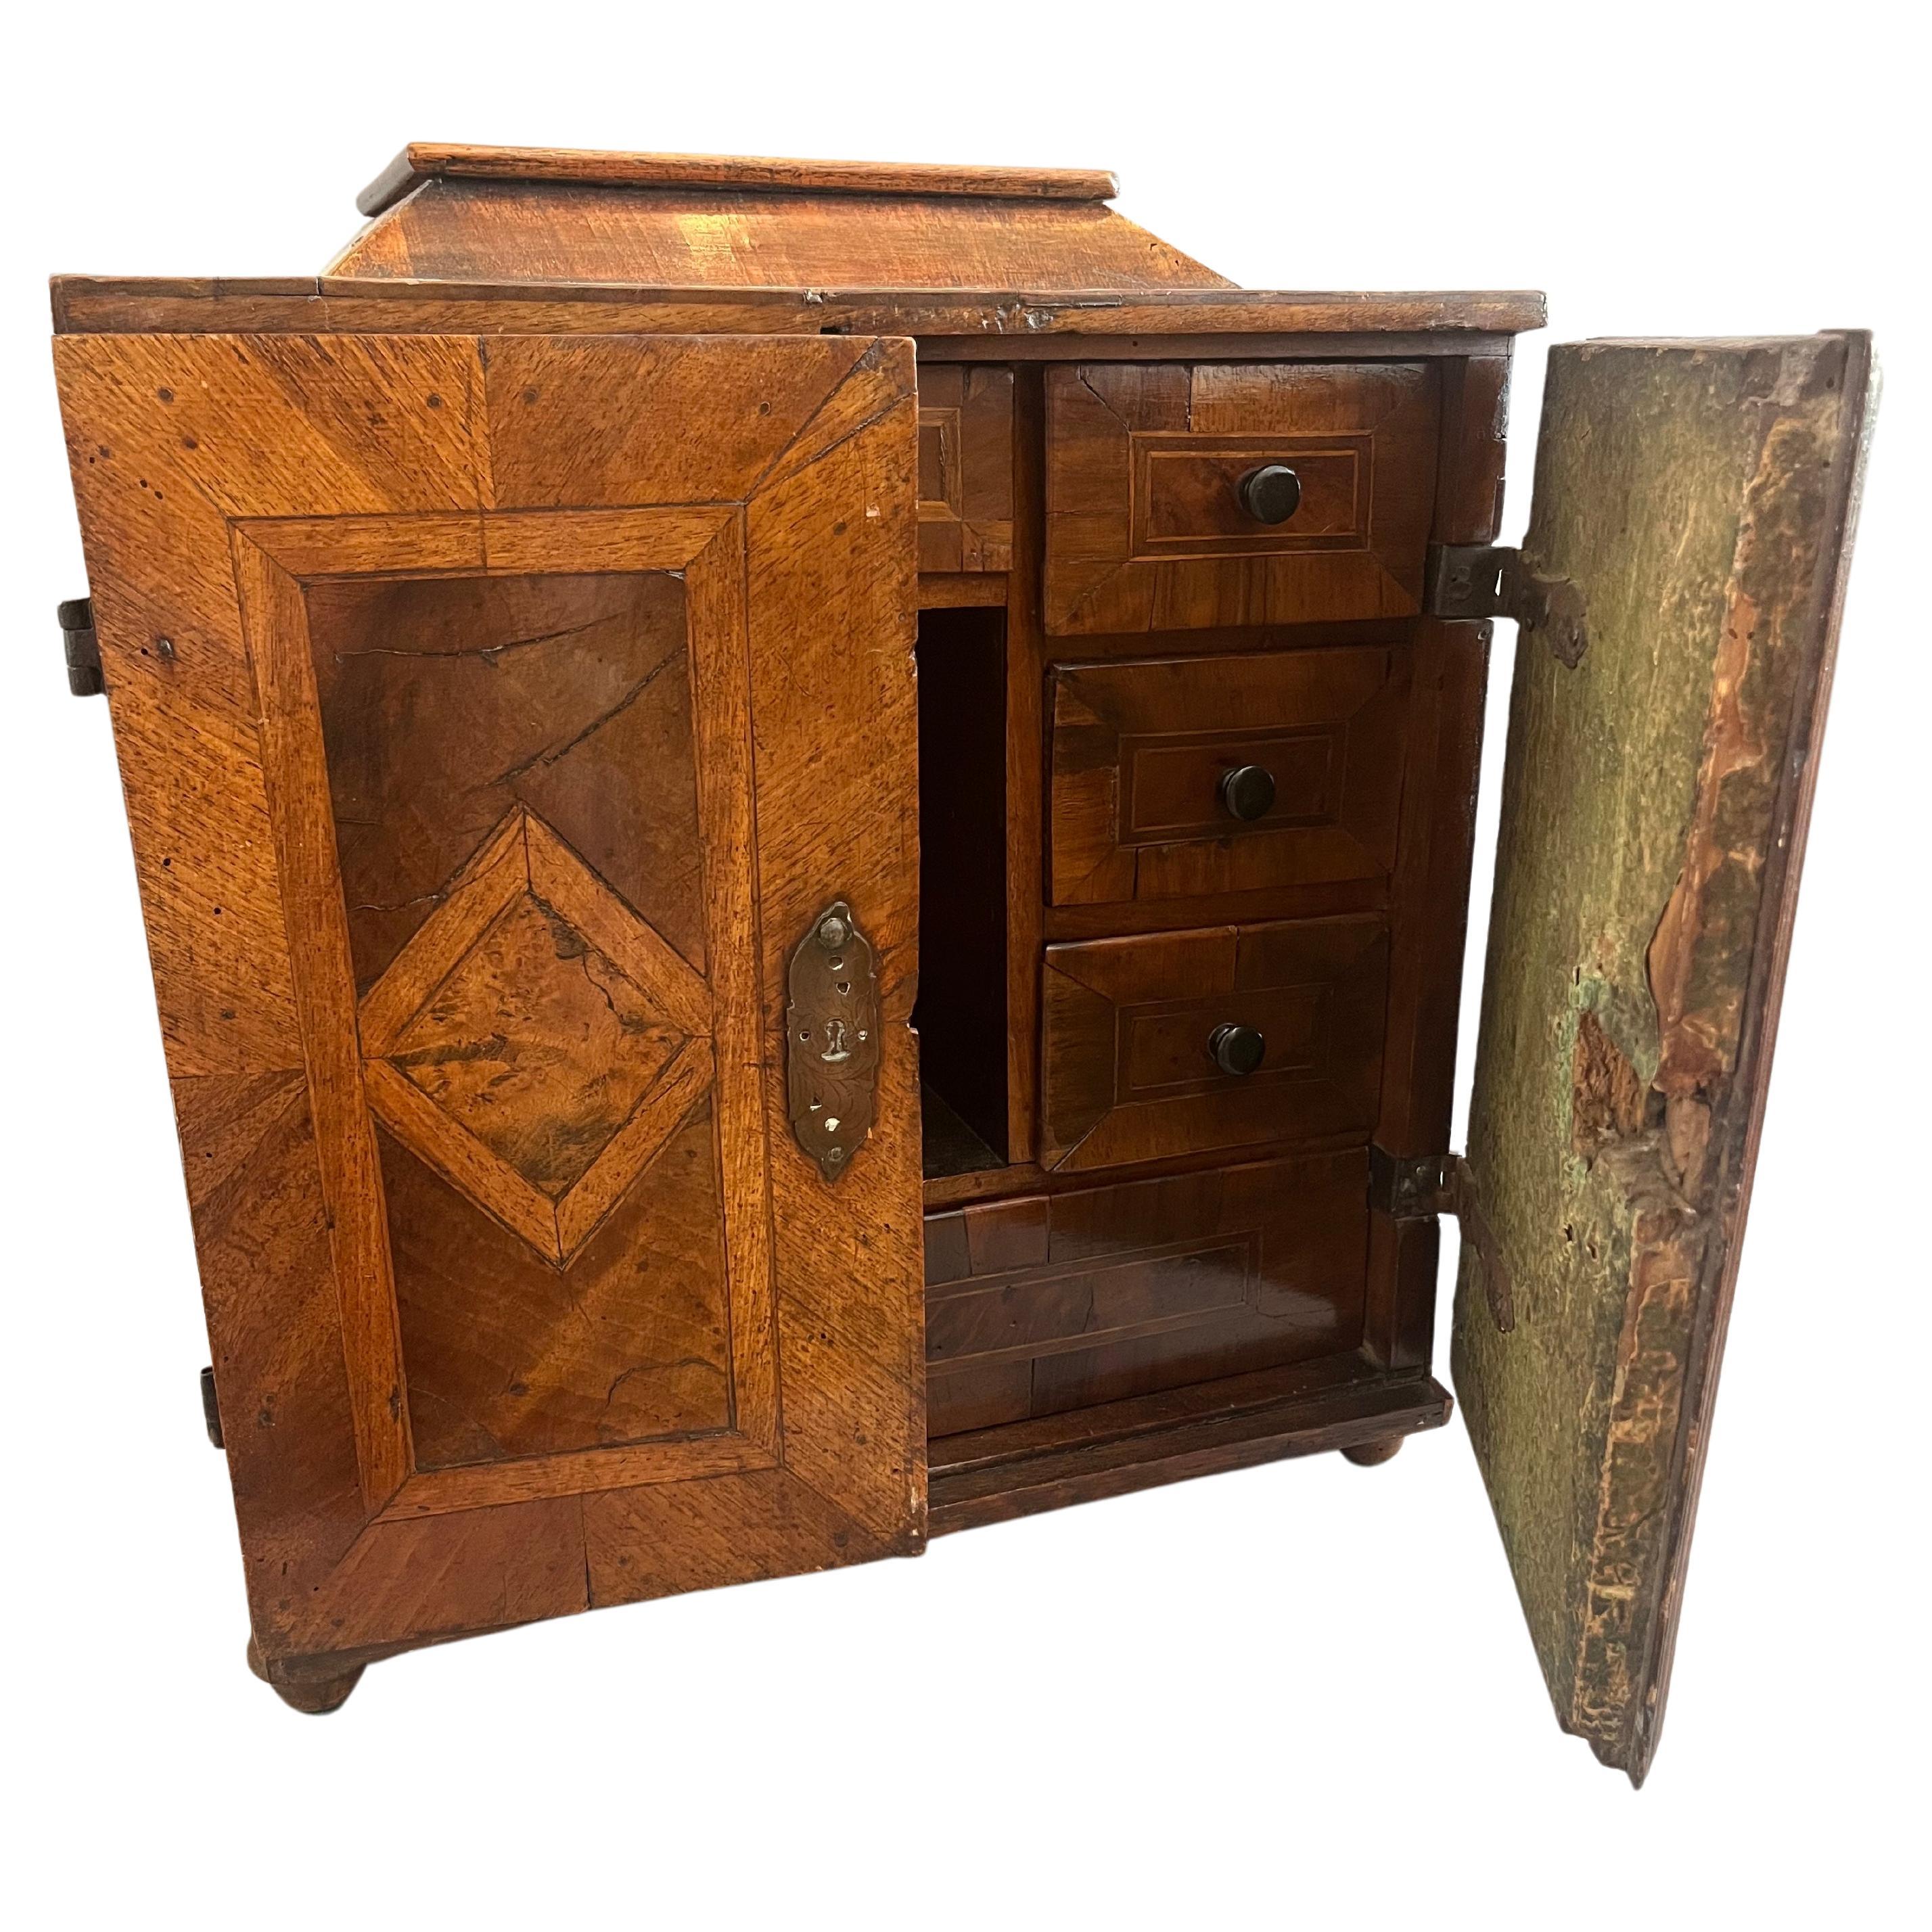  A Fine Quality 17th Cenury Bavarian Table Cabinet For Sale